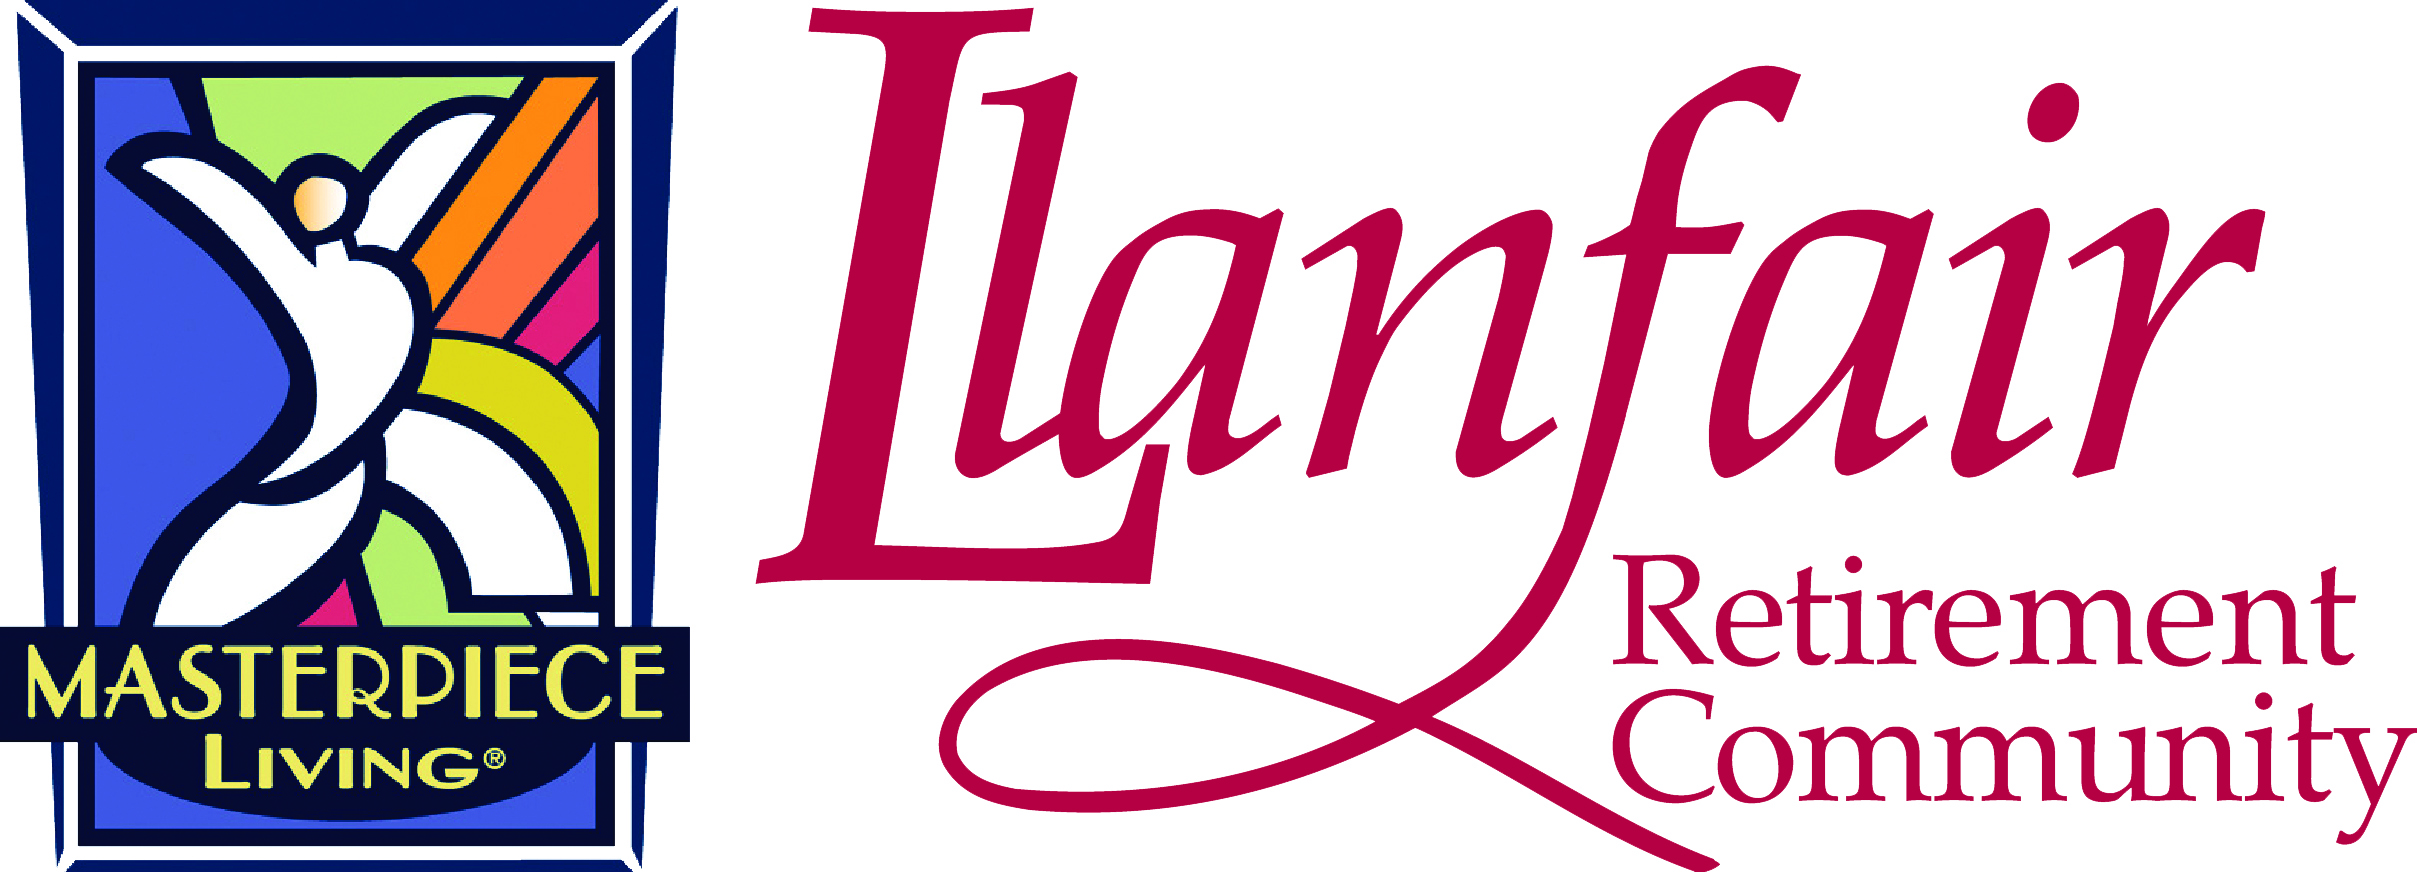 Llanfair is a Masterpiece Living community -- where aging is a vibrant, inspired process.